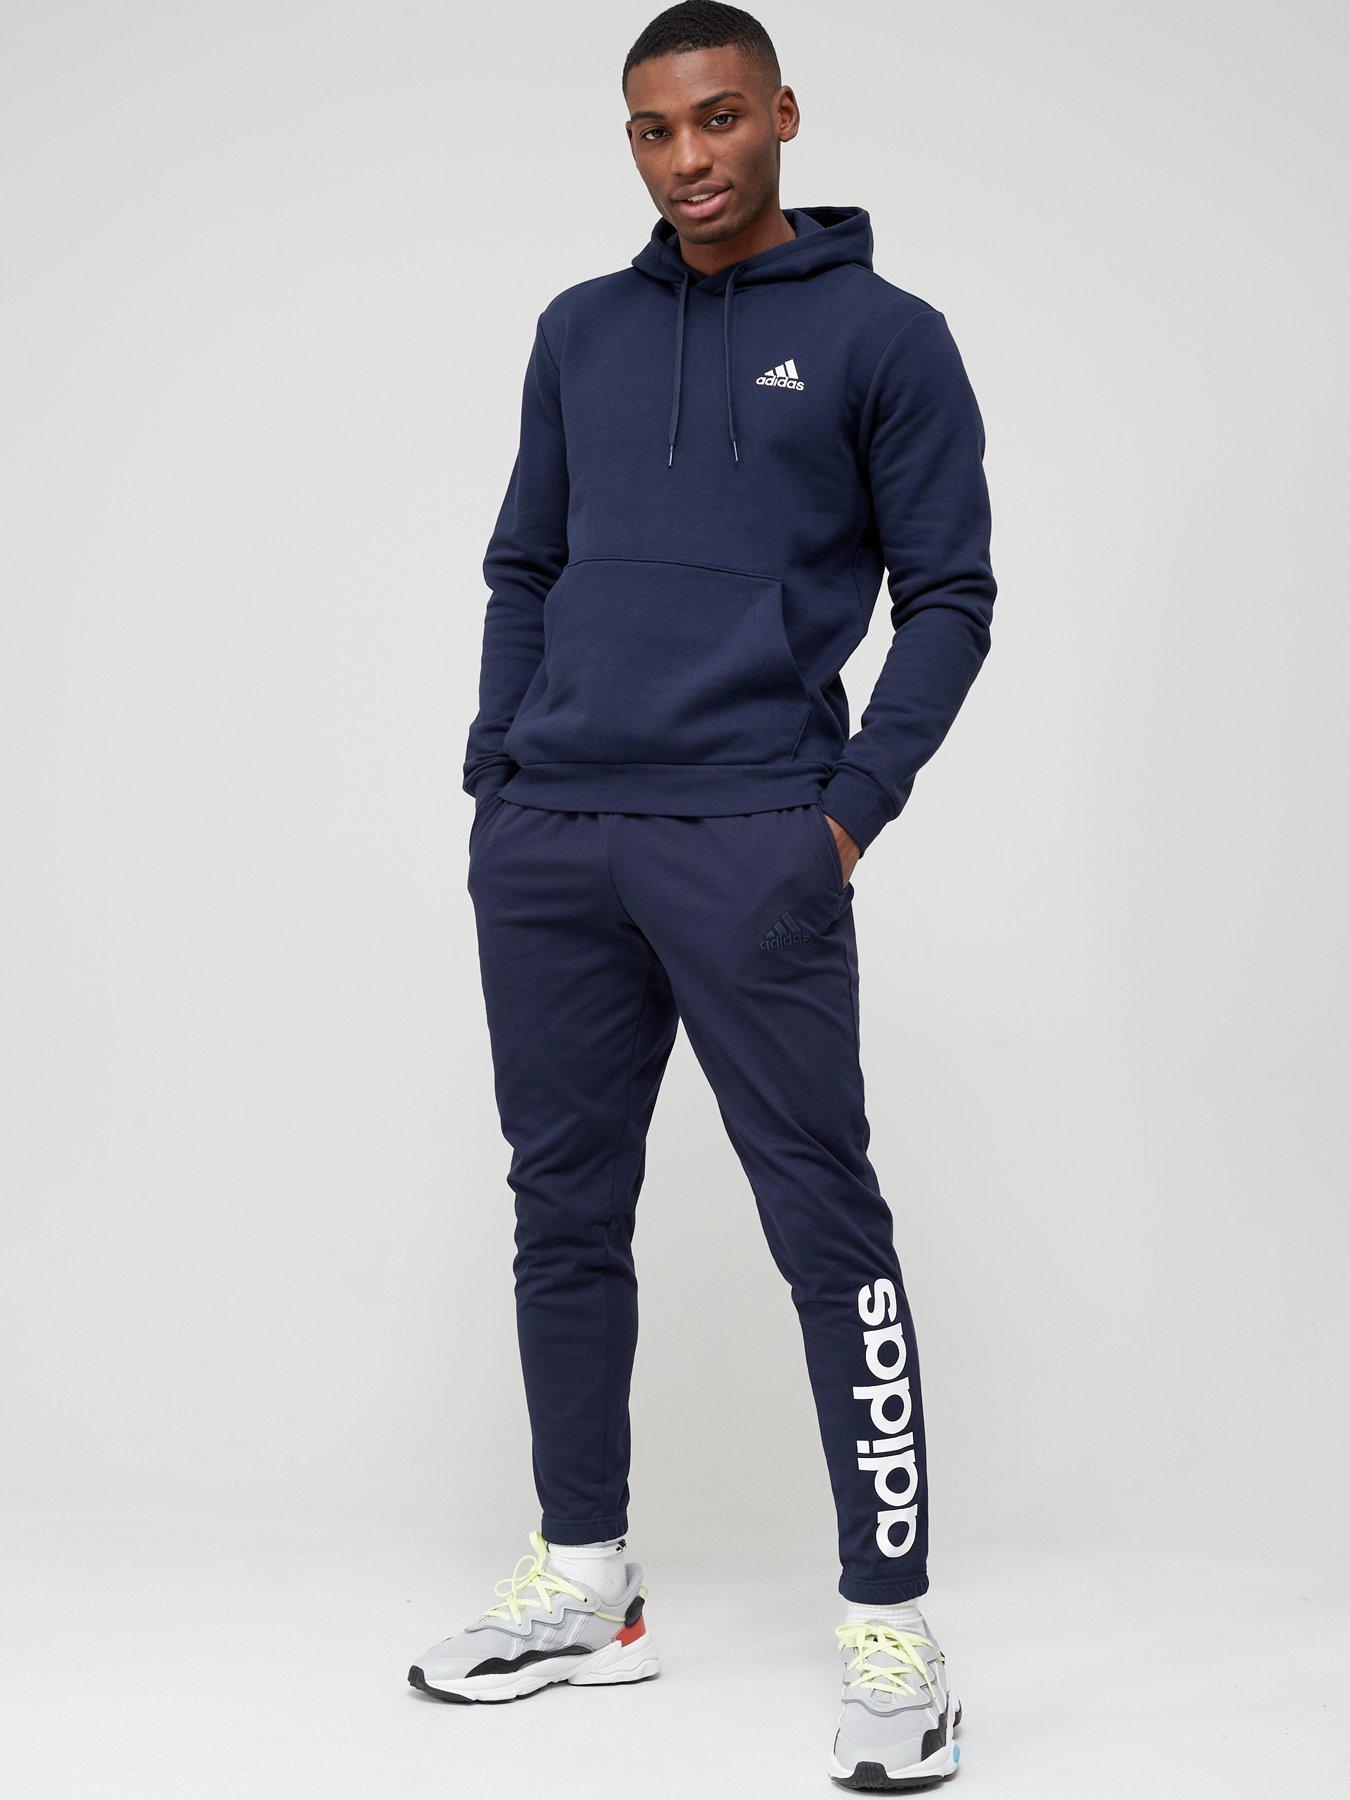  Feel Cozy Pullover Hoodie - Navy/White